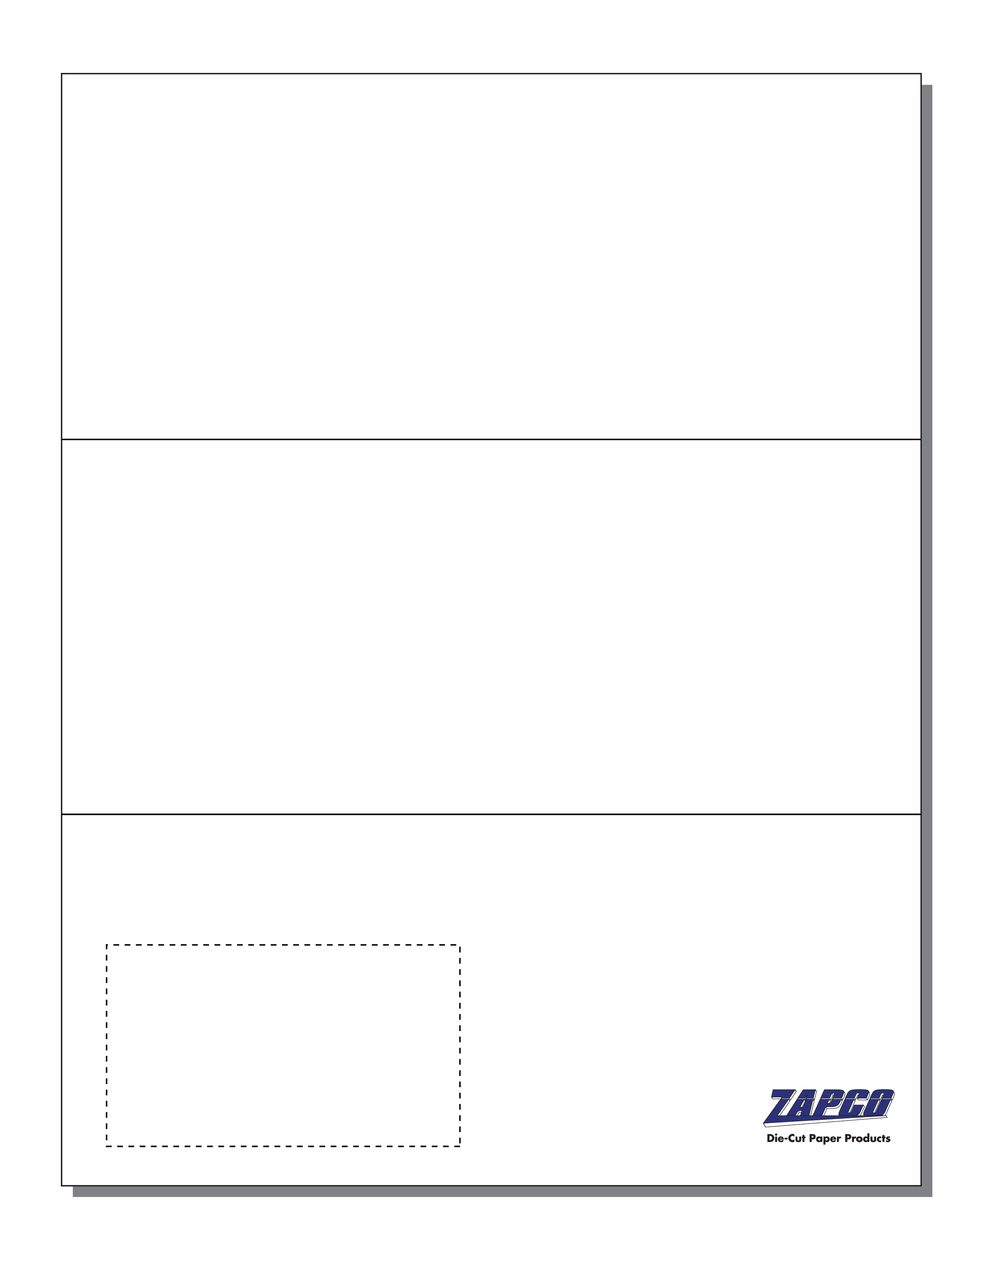 Item 115: 1-Up 3 3/4" x 8 1/2" Tri-Fold Mailer with Business Card 8 1/2" x 11" Sheet(250 Sheets)